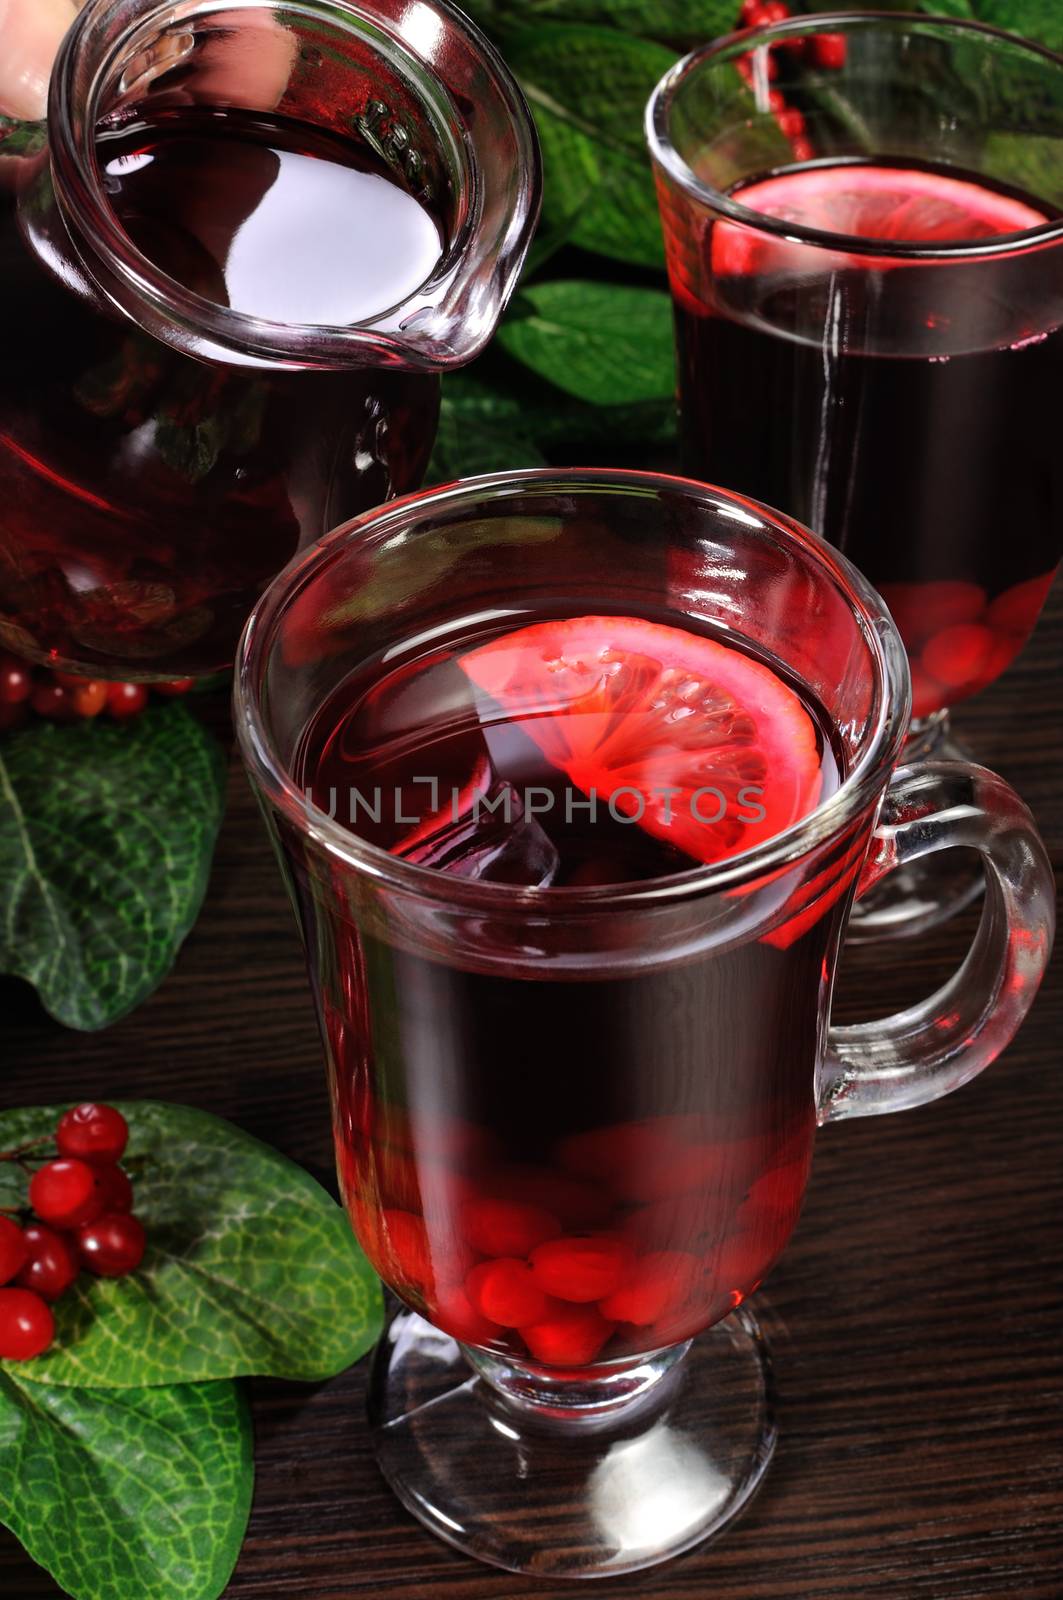 A glass of hot low-alcohol drink made from honey, cranberries, lemon